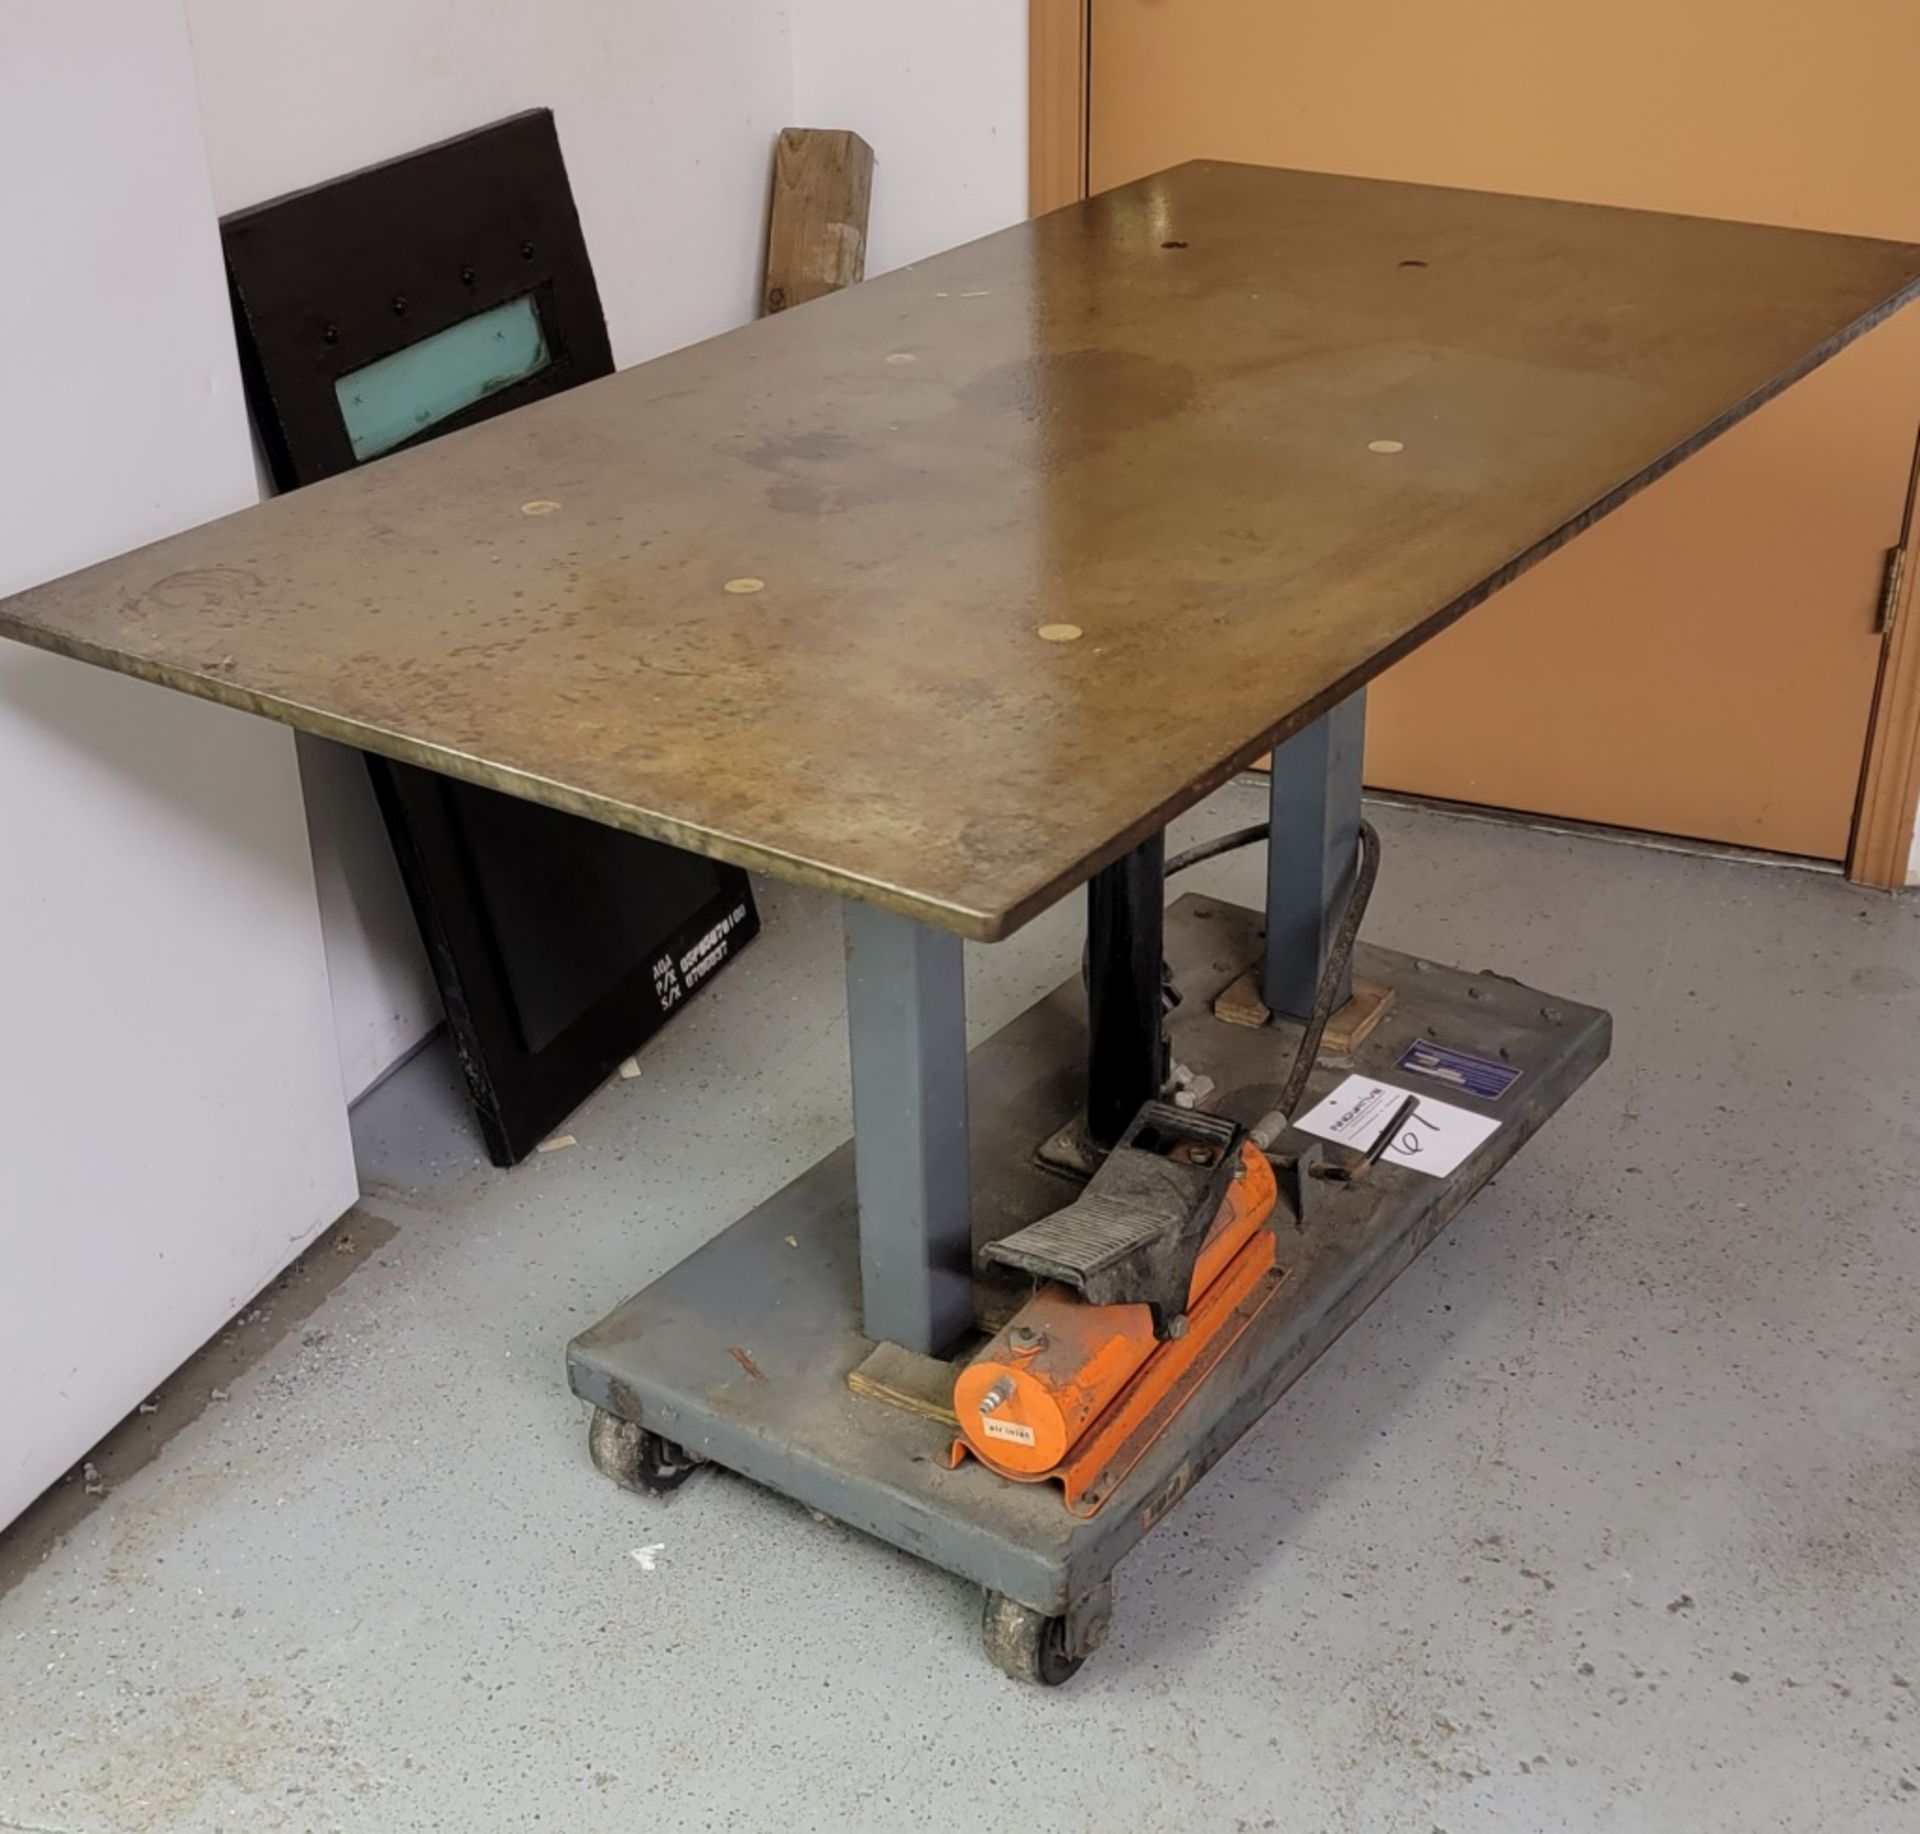 Westco Die Lift Table Model LT-10-1836, 1,000 lb. capacity, Converted to Pneumatic, 55" l x 29" w,